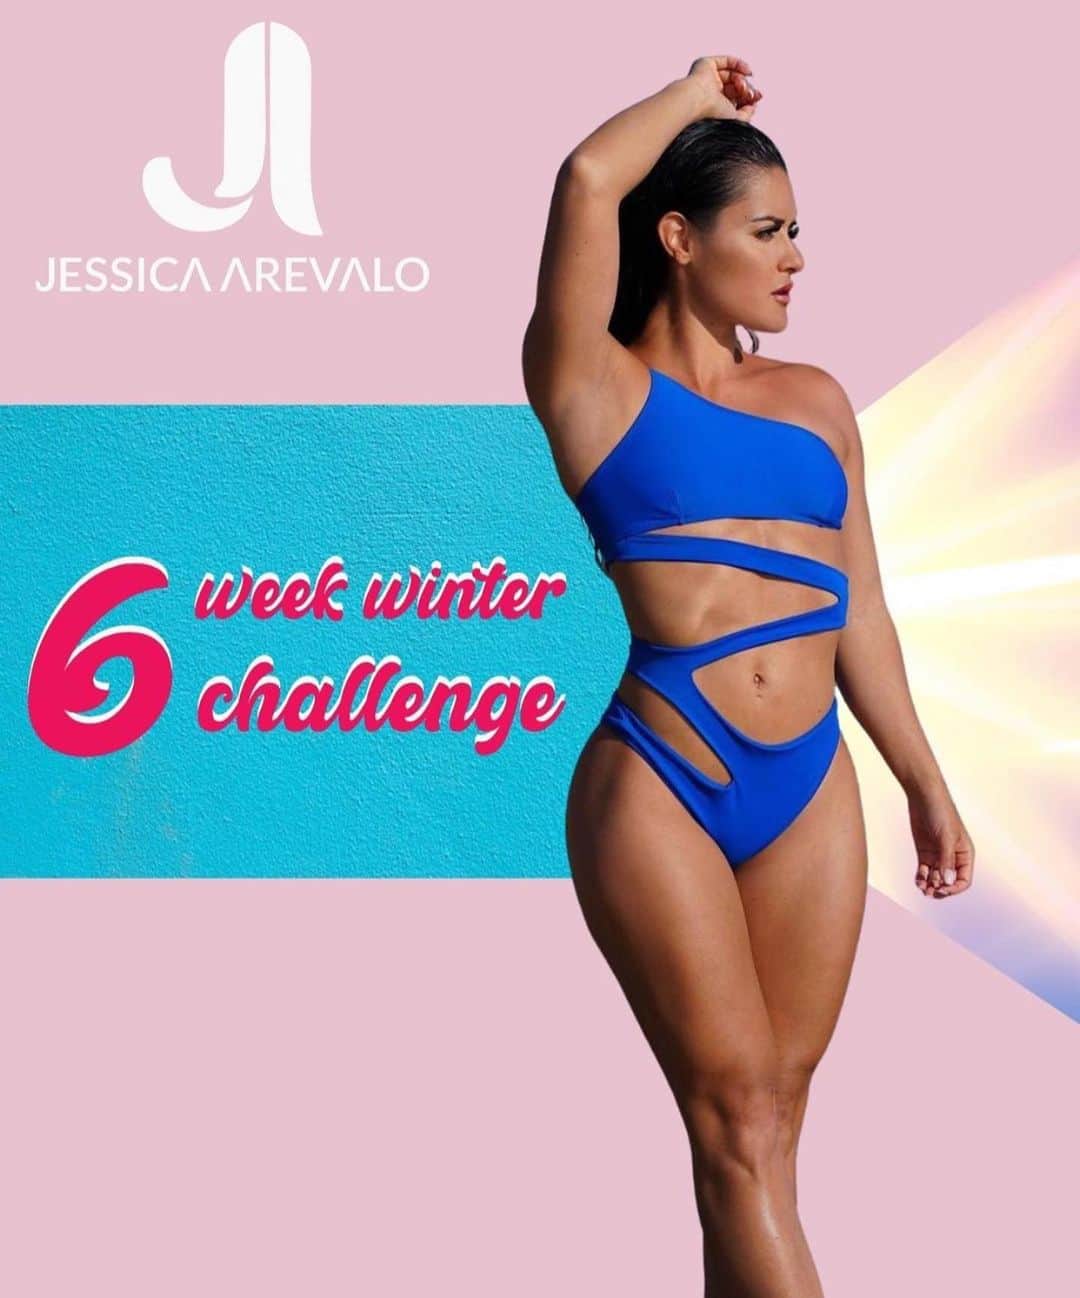 Jessica Arevaloのインスタグラム：「ONLY 8 DAYS LEFT TO SIGN UP! MY 6 WEEK WINTER CHALLENGE IS NOW LIVE!😍  💥IF YOU ARE LOOKING TO TONE UP, LOSE FAT OR LEARN MY WAYS THIS CHALLENGE IS FOR YOU!💥 - Open enrollment is through Dec 13 & the challenge starts Dec 14! DON’T WAIT!🙌🏼 - 🔺My 6 Week Winter is challenge is just $99!!!  🔺This program includes: - 🔺BOTH GYM/HOME WORKOUTS  - 🔺Over $6k in cash prizes - 🔺One on One Coaching with me - 🔺Weekly Check ins - 🔺Workout Program +Macros/Meal Plans + Cardio Regimen  - 🔺Private Facebook Group and more! - 🔺WORLDWIDE ENTRY  - 🔺 FOR WOMEN & MEN  - CHECK OUT LINK IN BIO TO SIGN UP!👆🏼If you have any question please feel free to DM me directly!📩」